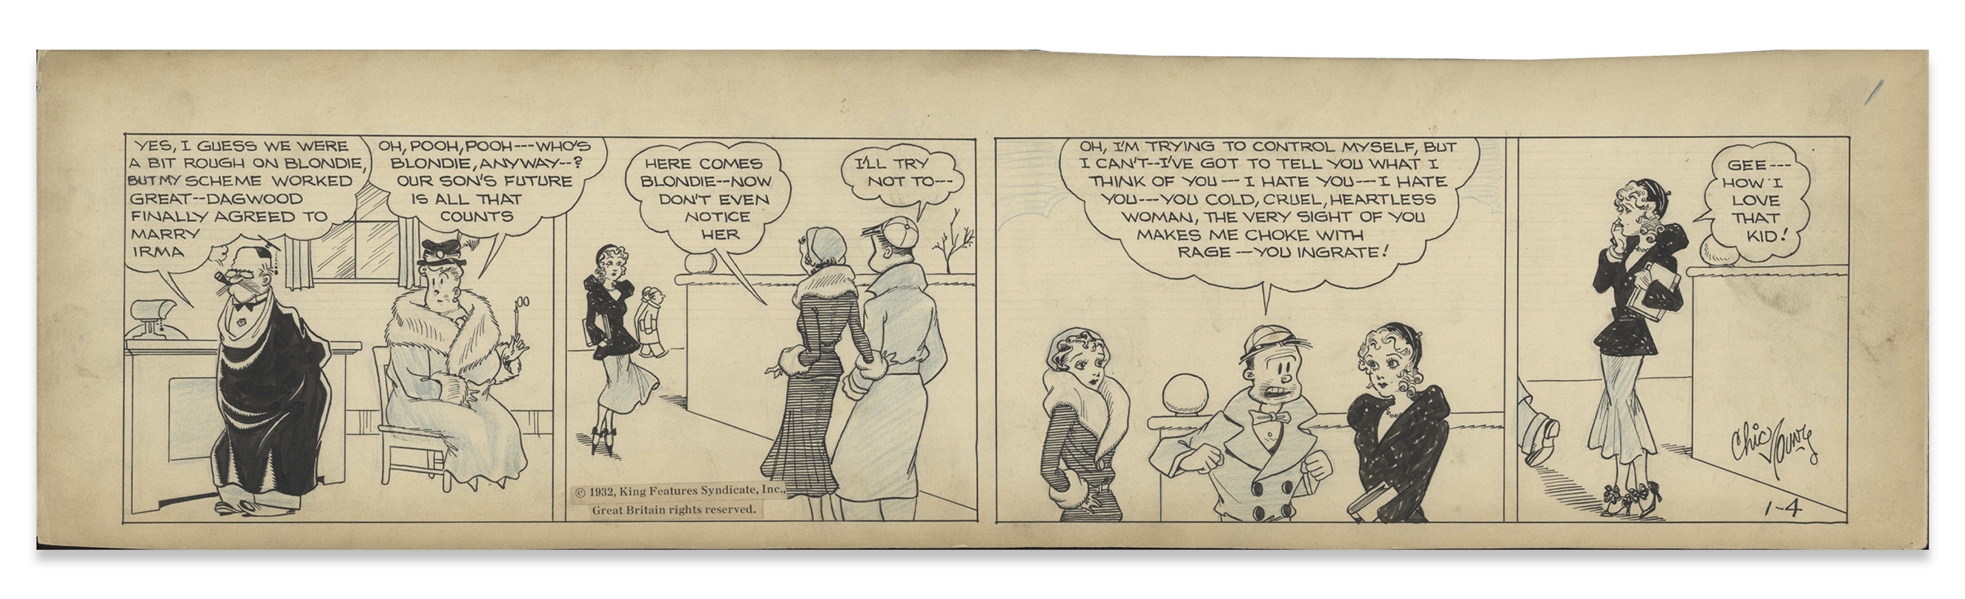 Chic Young Hand-Drawn ''Blondie'' Comic Strip From 1932 Titled ''Her Caveman!'' -- Dagwood's Jealous That Blondie Is Engaged to Another Man